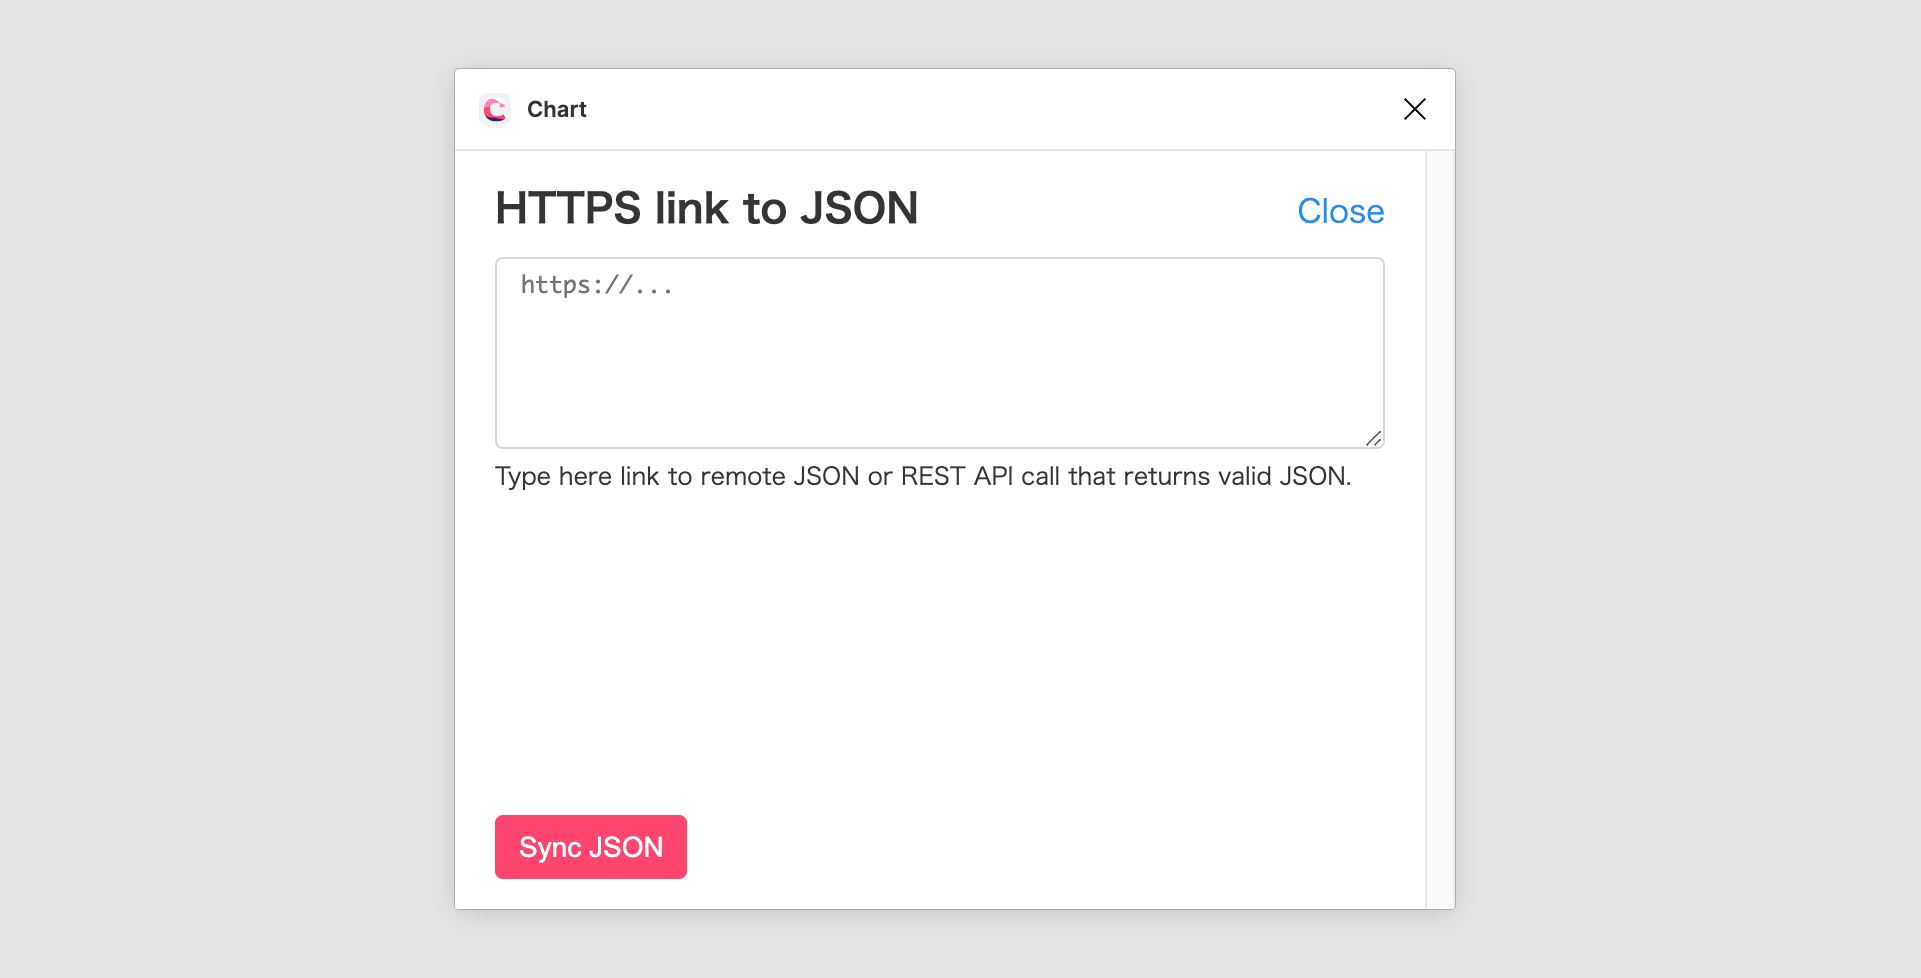 「HTTPS link to JSON」